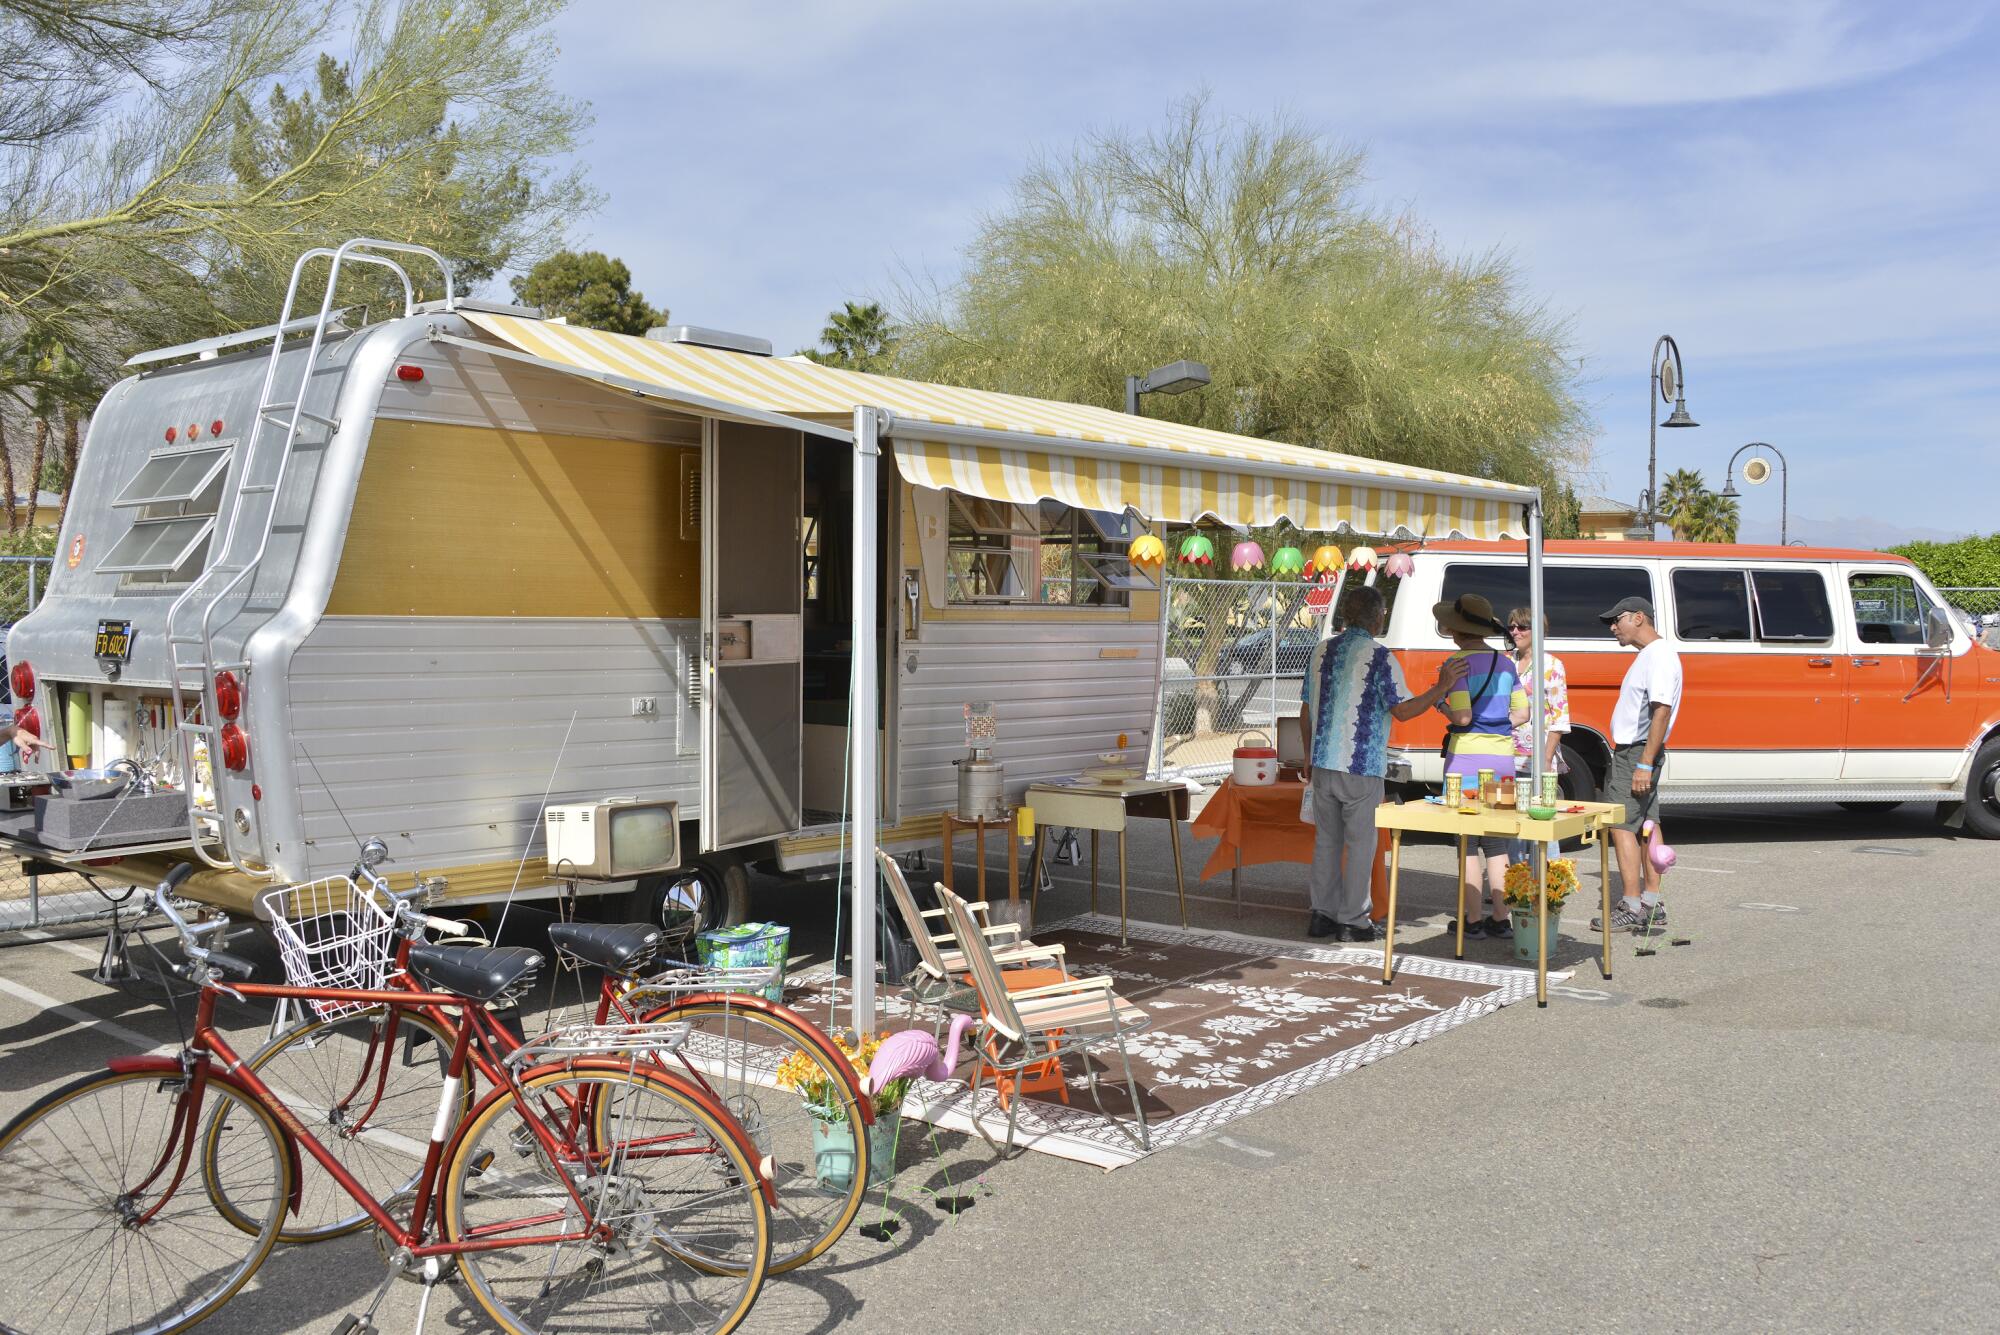 People and bicycles stand outside a parked vintage travel trailer.